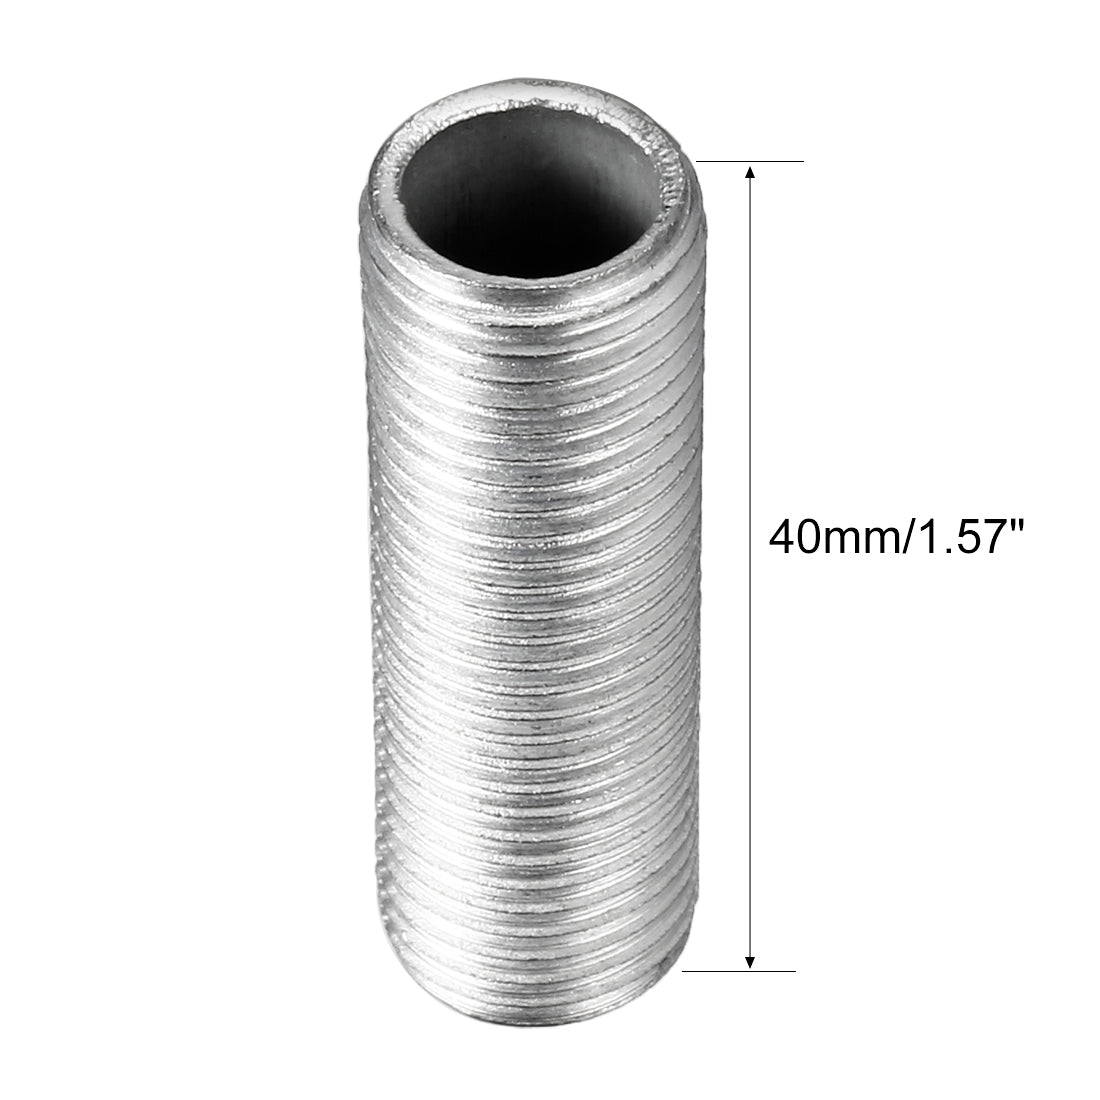 uxcell Uxcell Zinc Plated Lamp Pipe Nipple M10 40mm Length 1mm Pitch All Threaded 10Pcs